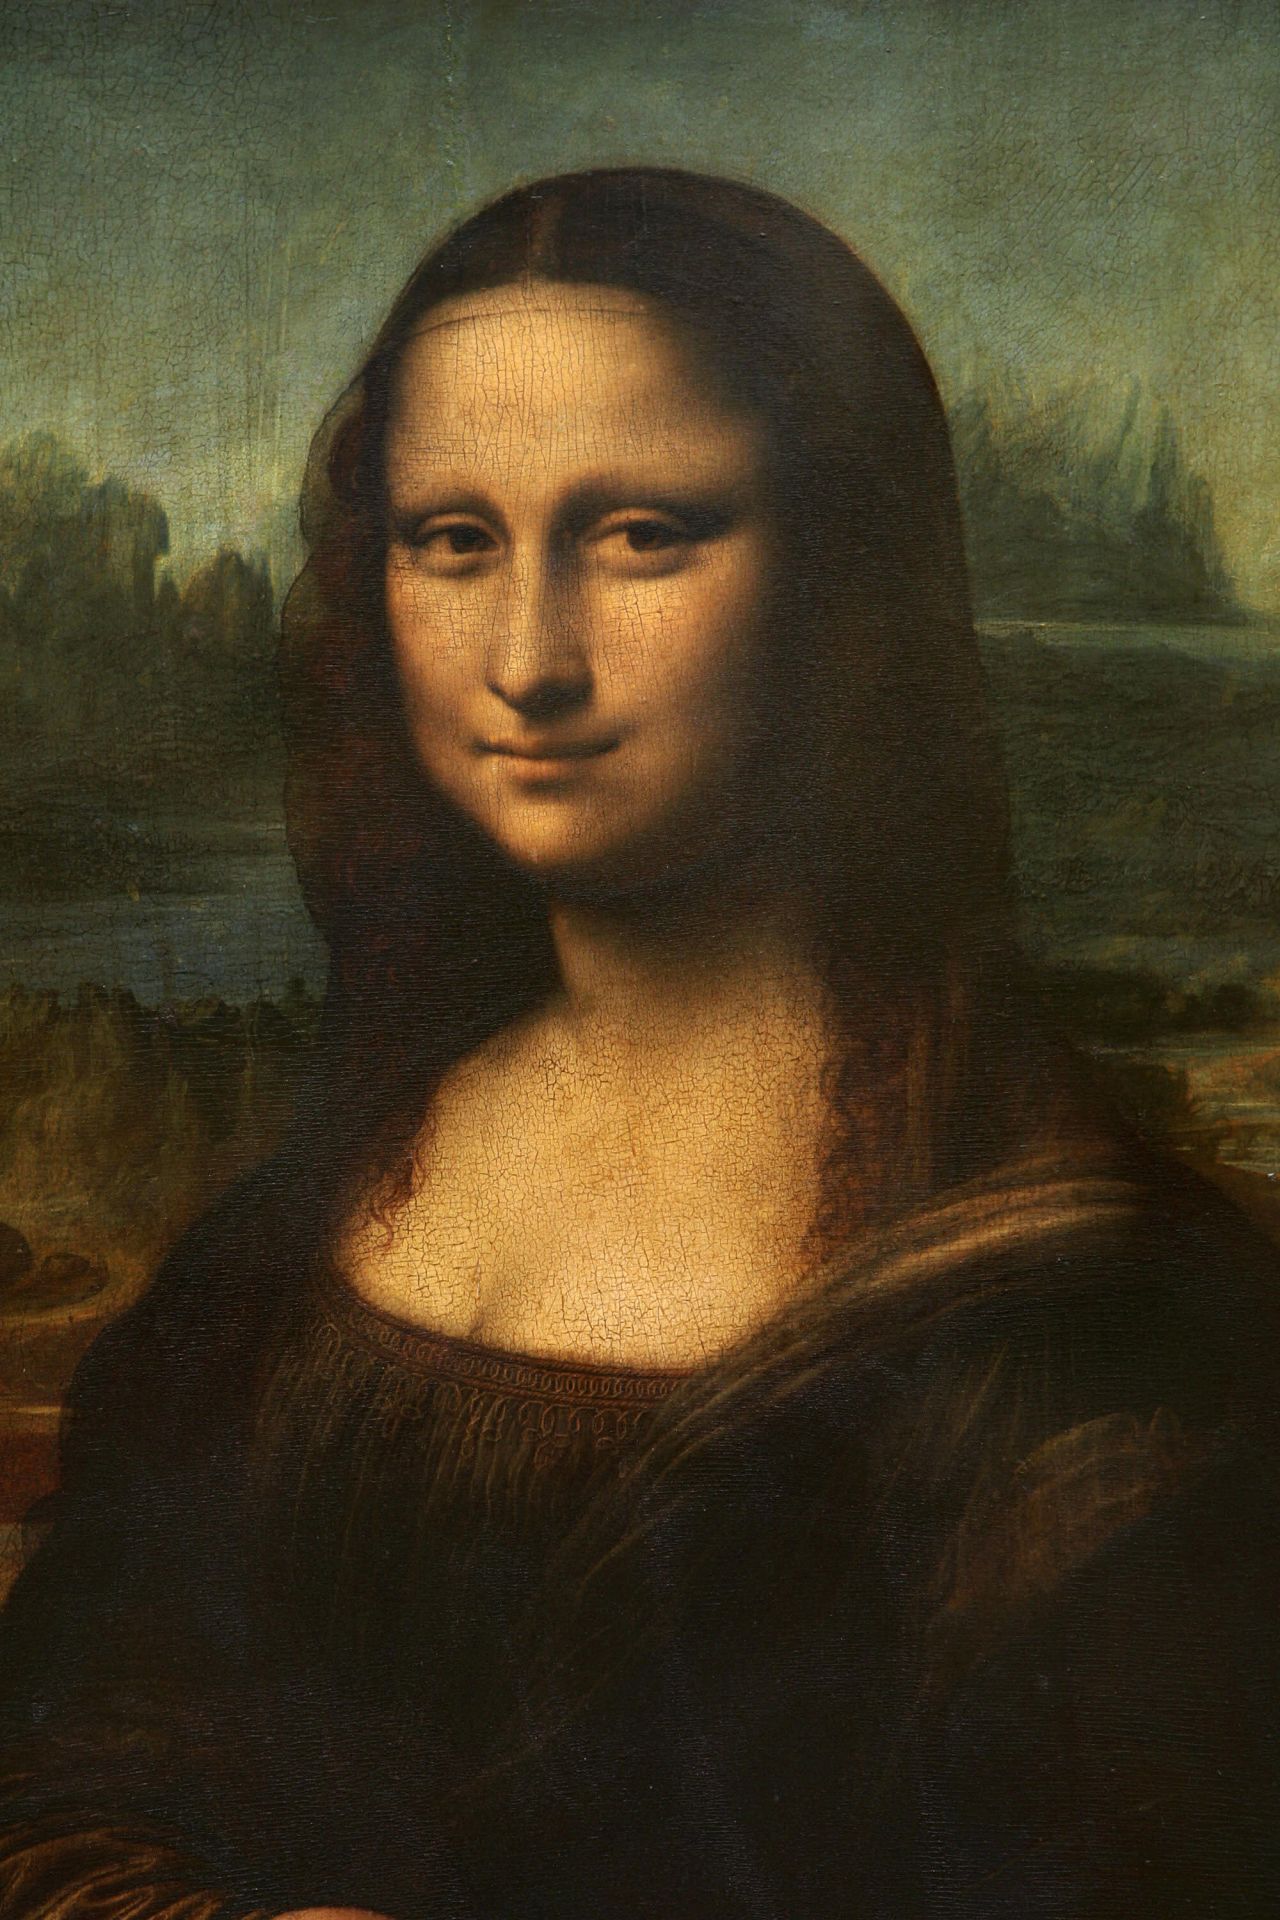 Mystery surrounds the identity of the "Mona Lisa," with some people positing that the smiling figure is in fact a self-portrait of Leonardo da Vinci himself, while others believe it was a coded portrait of a male associate.  